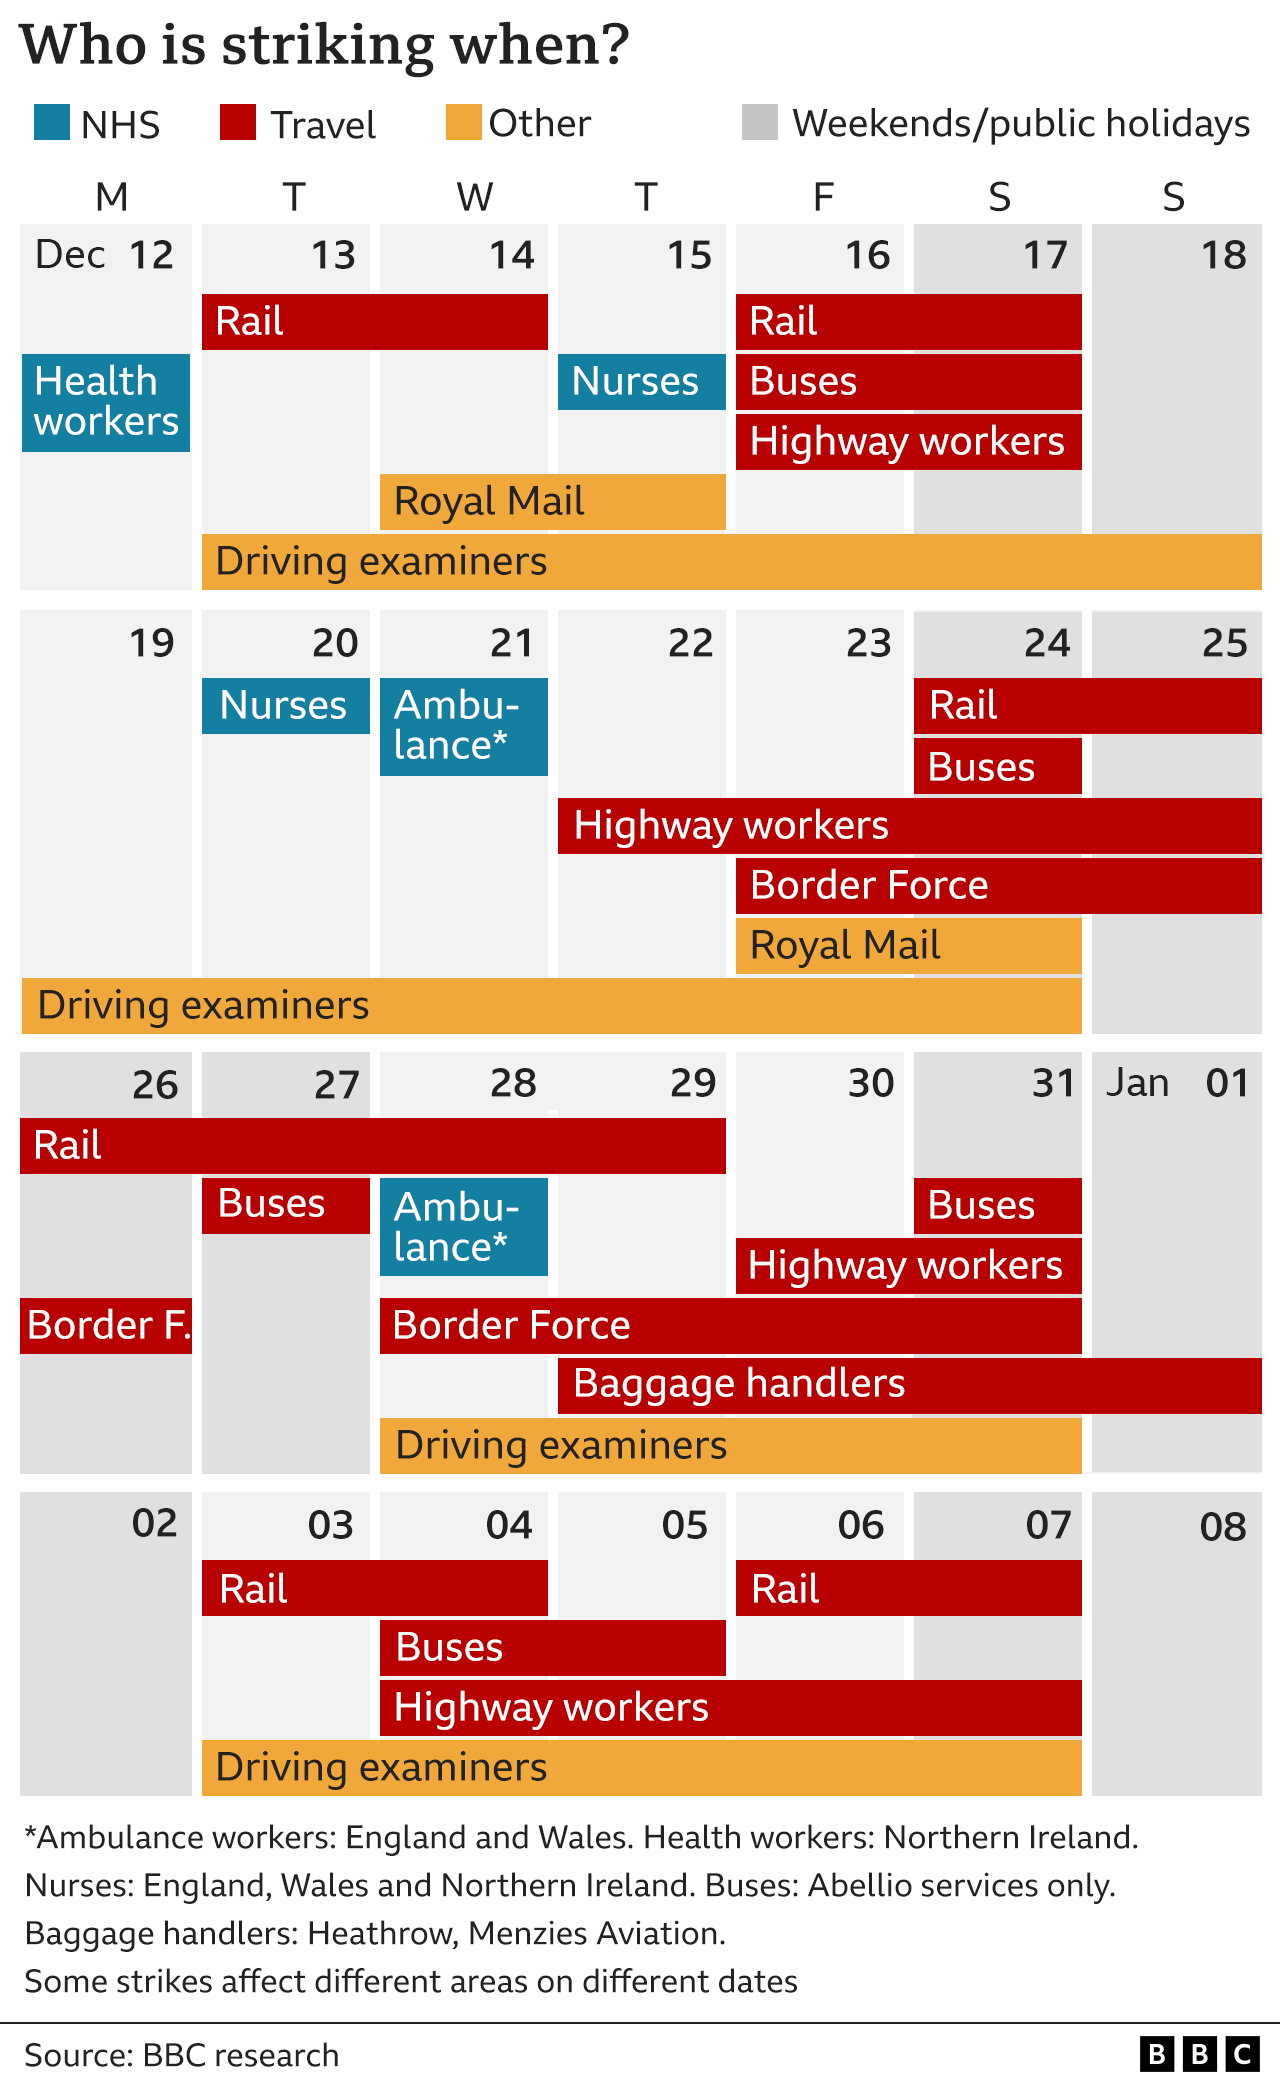 Graphic which shows those going on strike in the next month - they include ambulance workers in England and Wales, nurses, health workers in Northern Ireland, rail workers, Abellio buses, some Heathrow baggage handlers, highway workers, border force workers, driving examiners and Royal Mail.